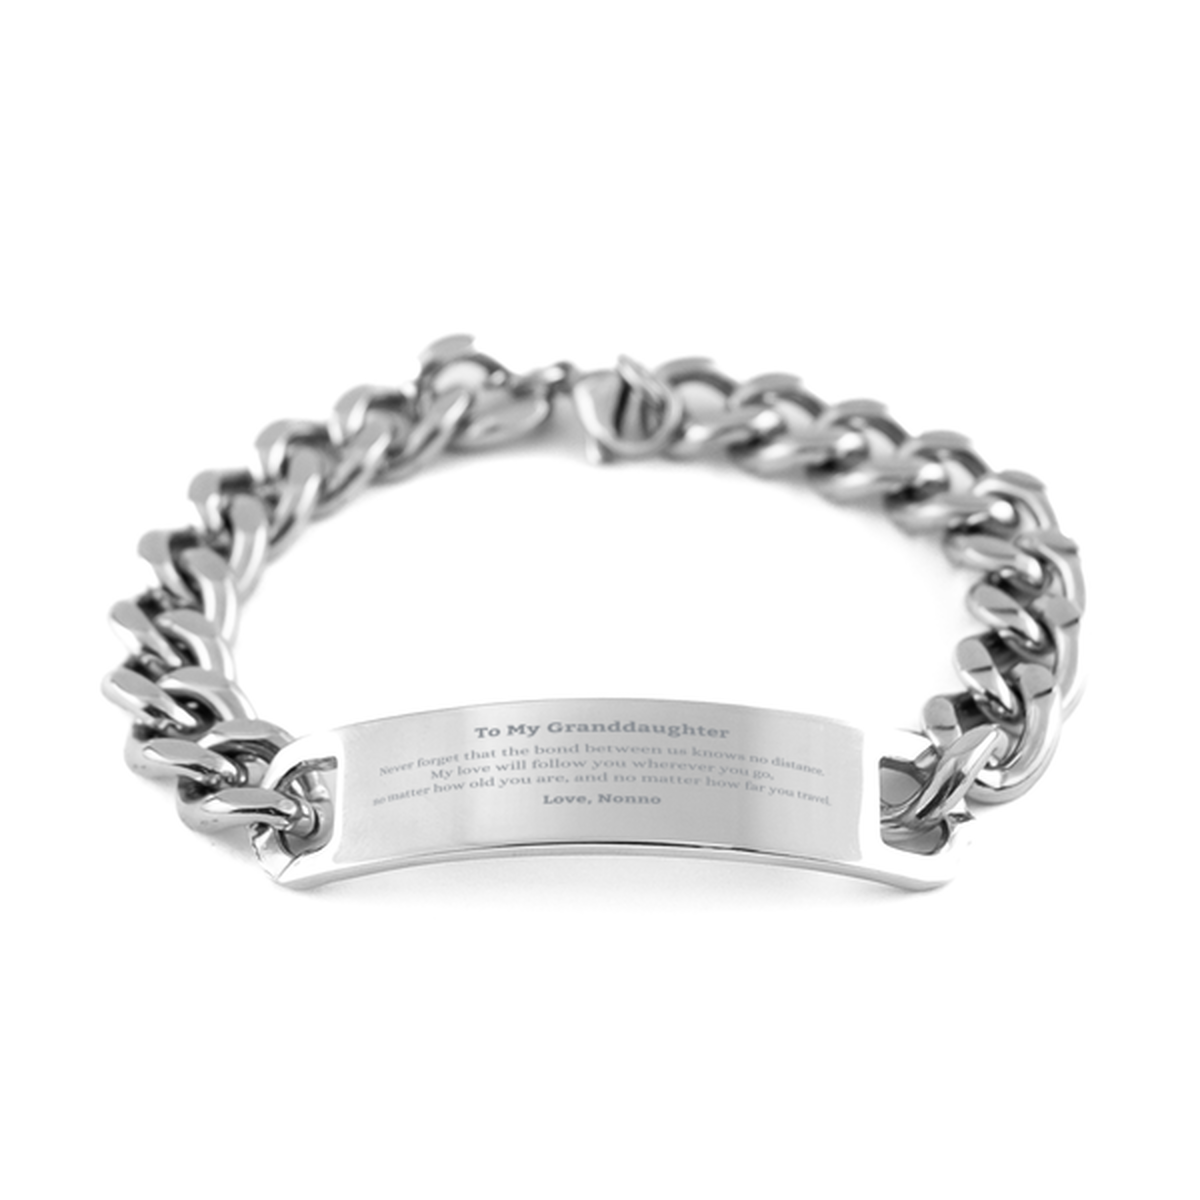 Granddaughter Birthday Gifts from Nonno, Adjustable Cuban Chain Stainless Steel Bracelet for Granddaughter Christmas Graduation Unique Gifts Granddaughter Never forget that the bond between us knows no distance. Love, Nonno